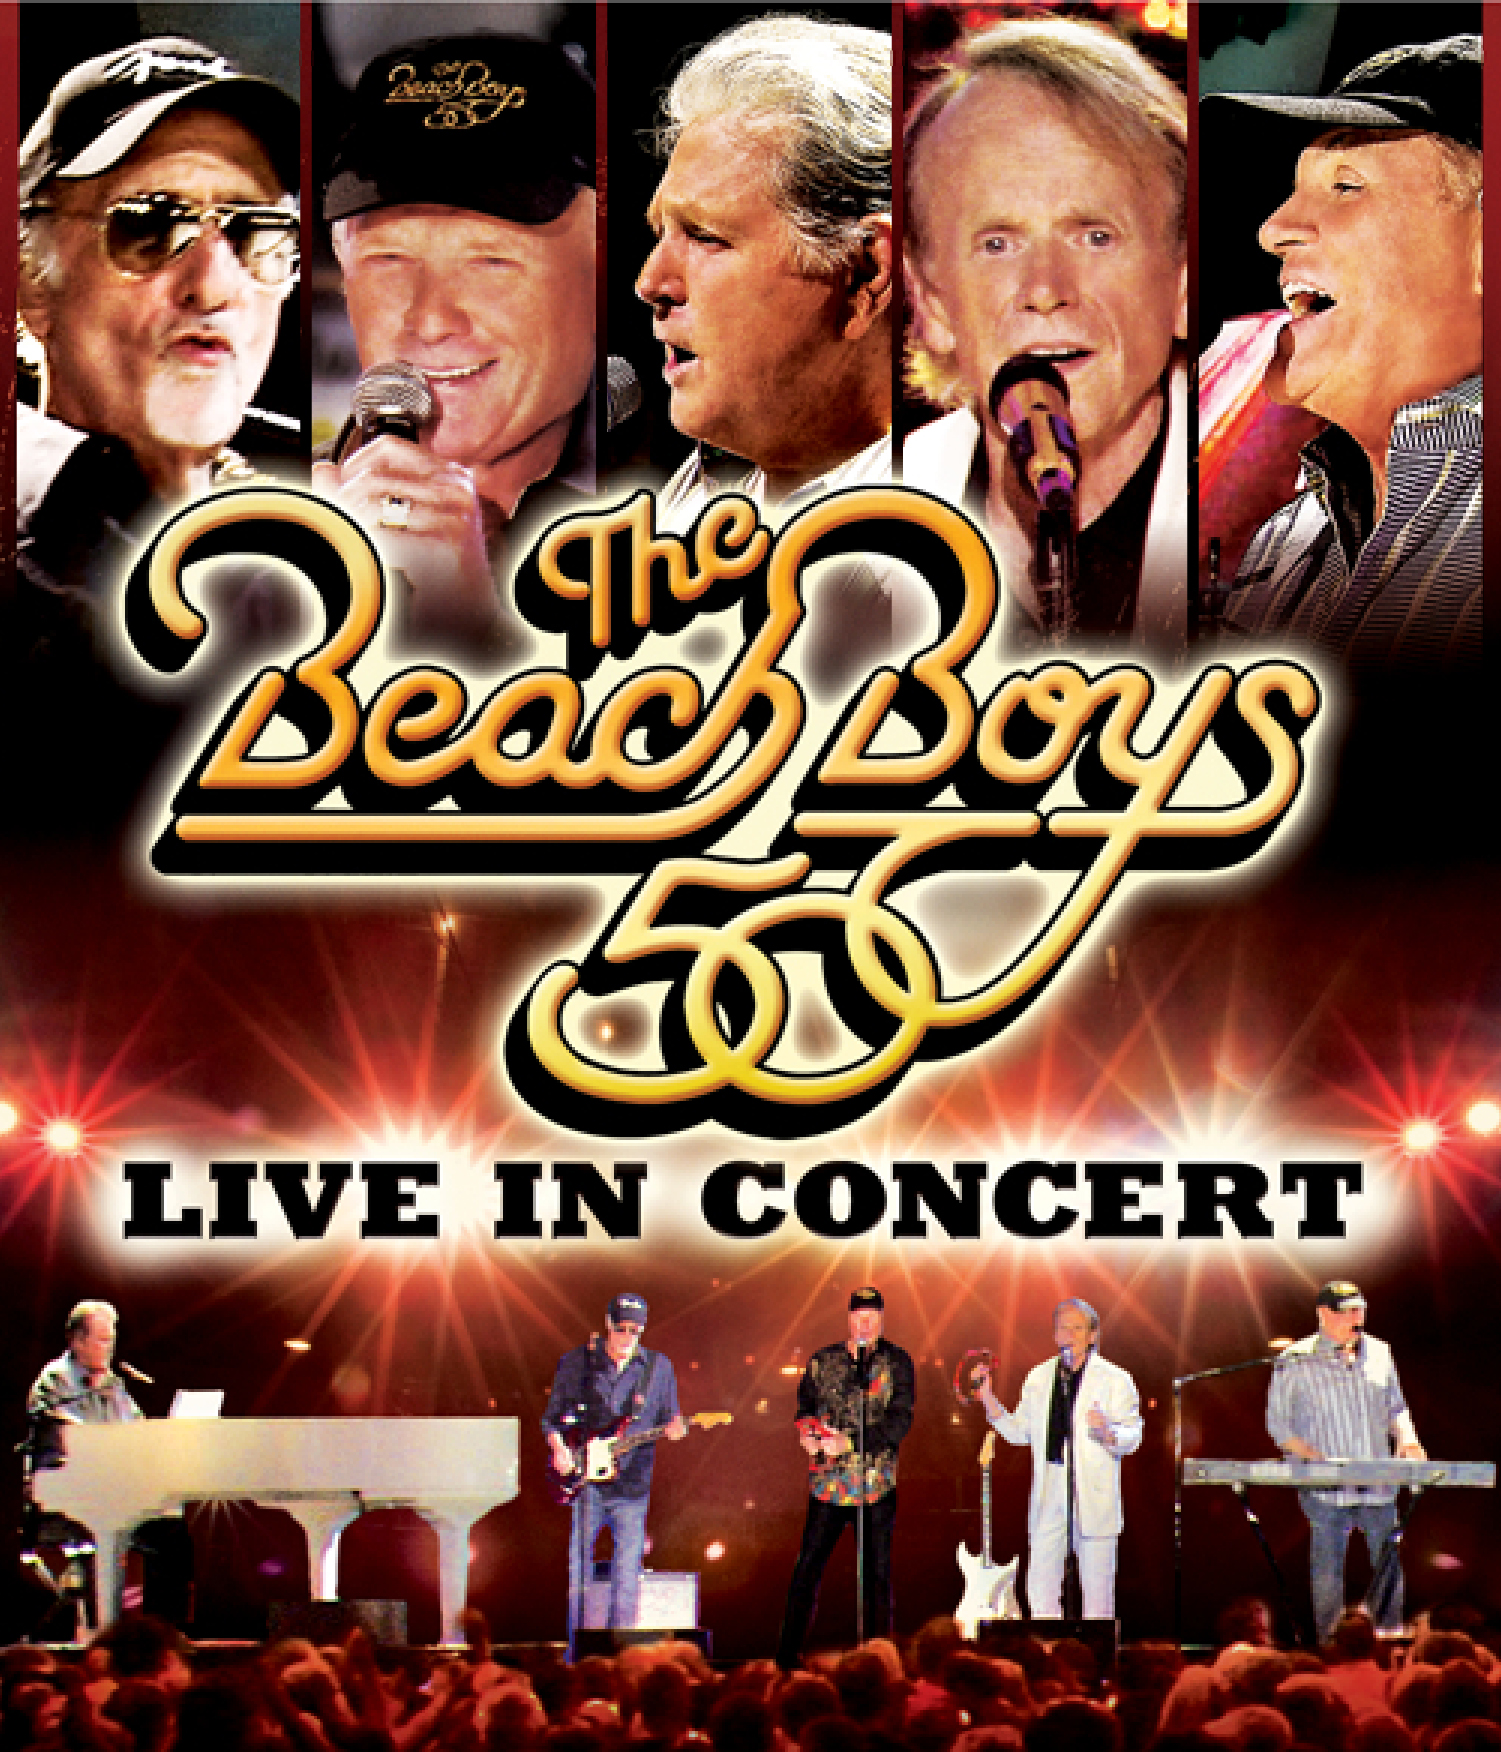 The Beach Boys' 50th anniversary DVD is just in time for Christmas